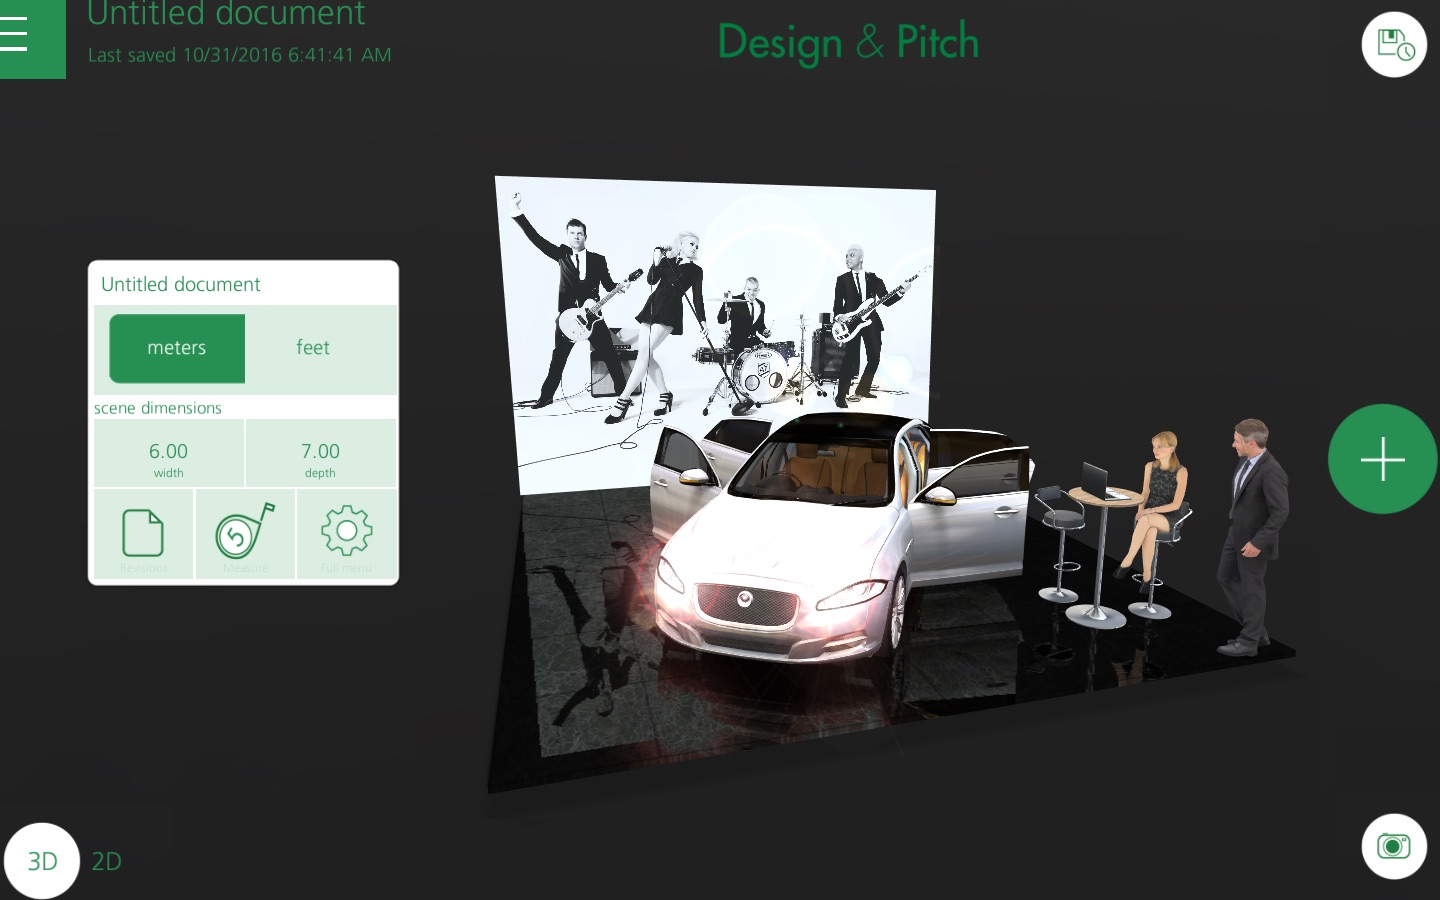 Design and Pitch 1.1 : Main Window